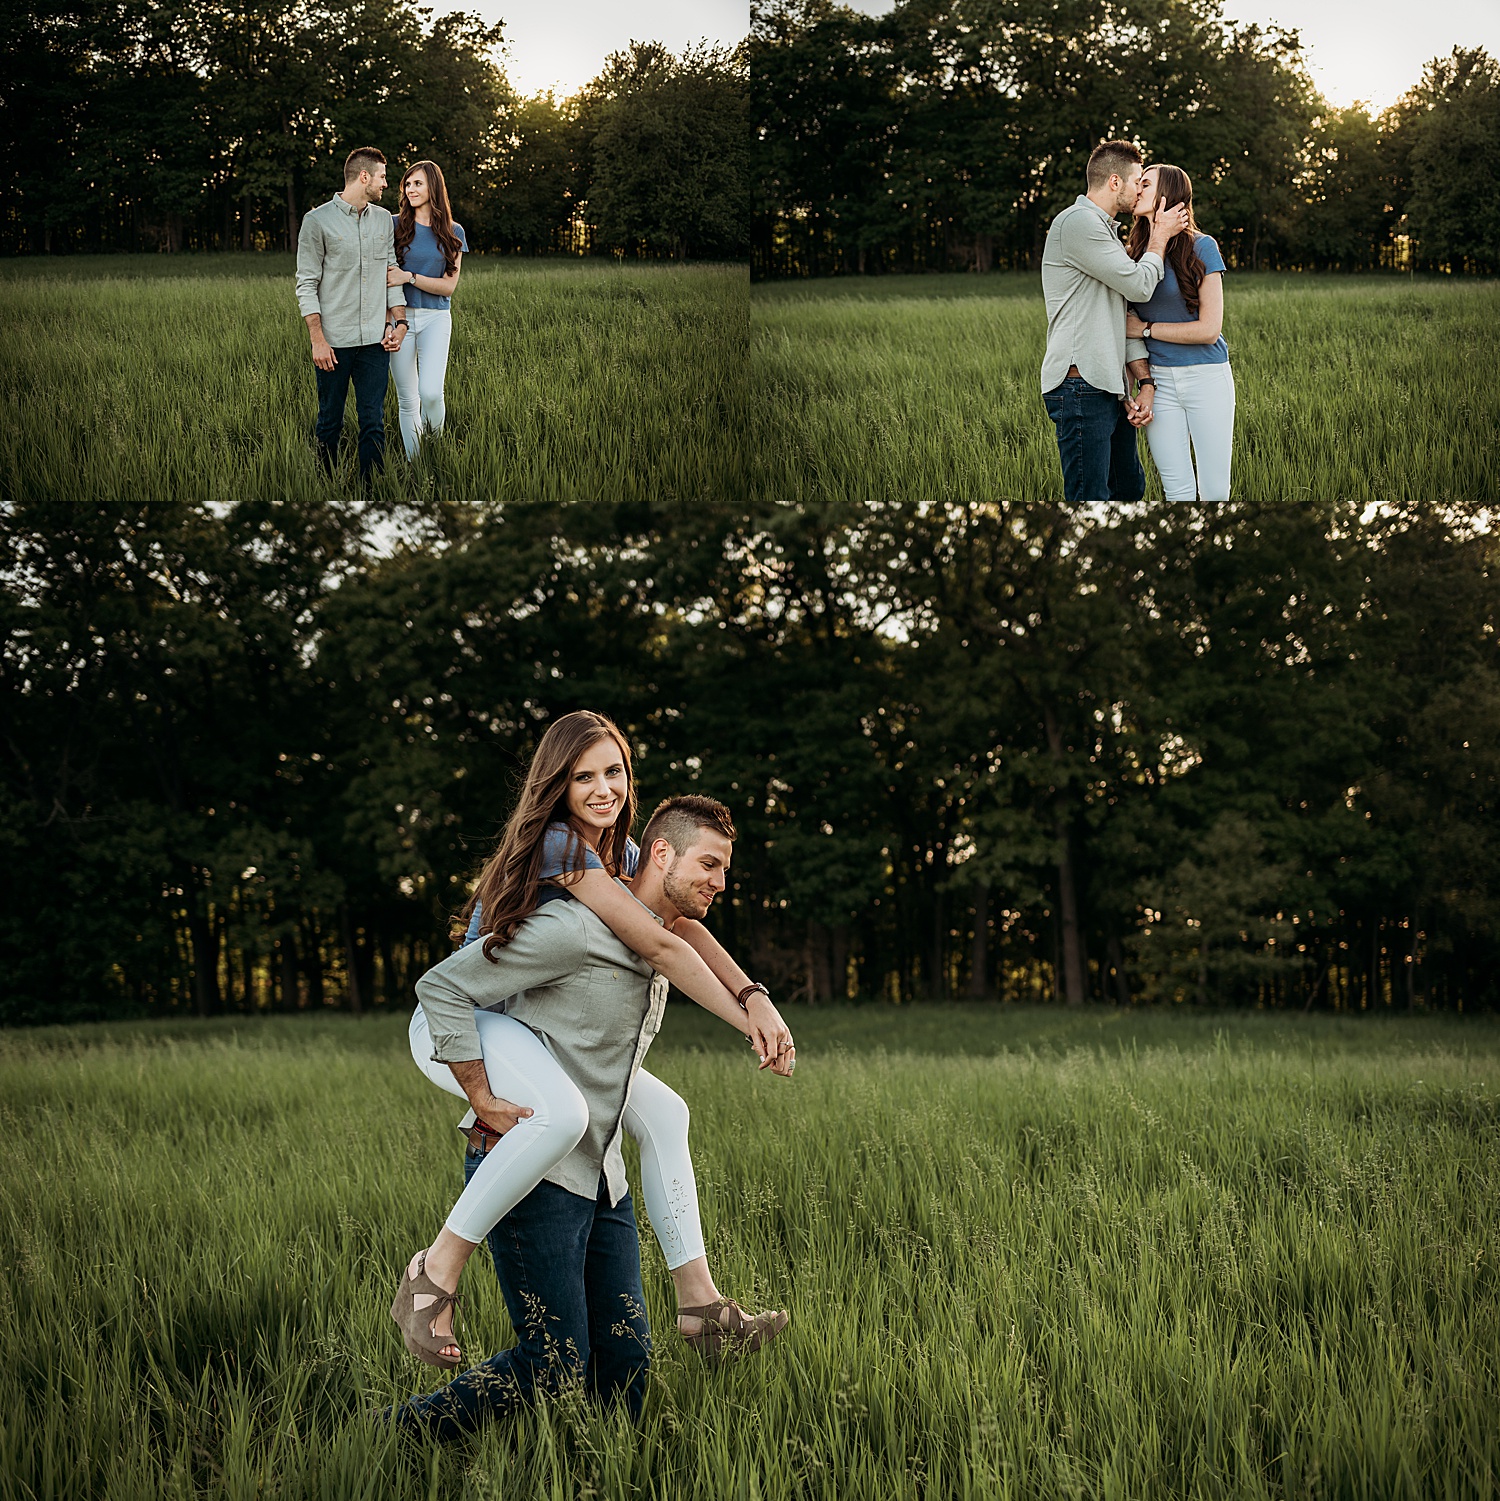 Engaged couple giving piggyback rides and holding hands through field